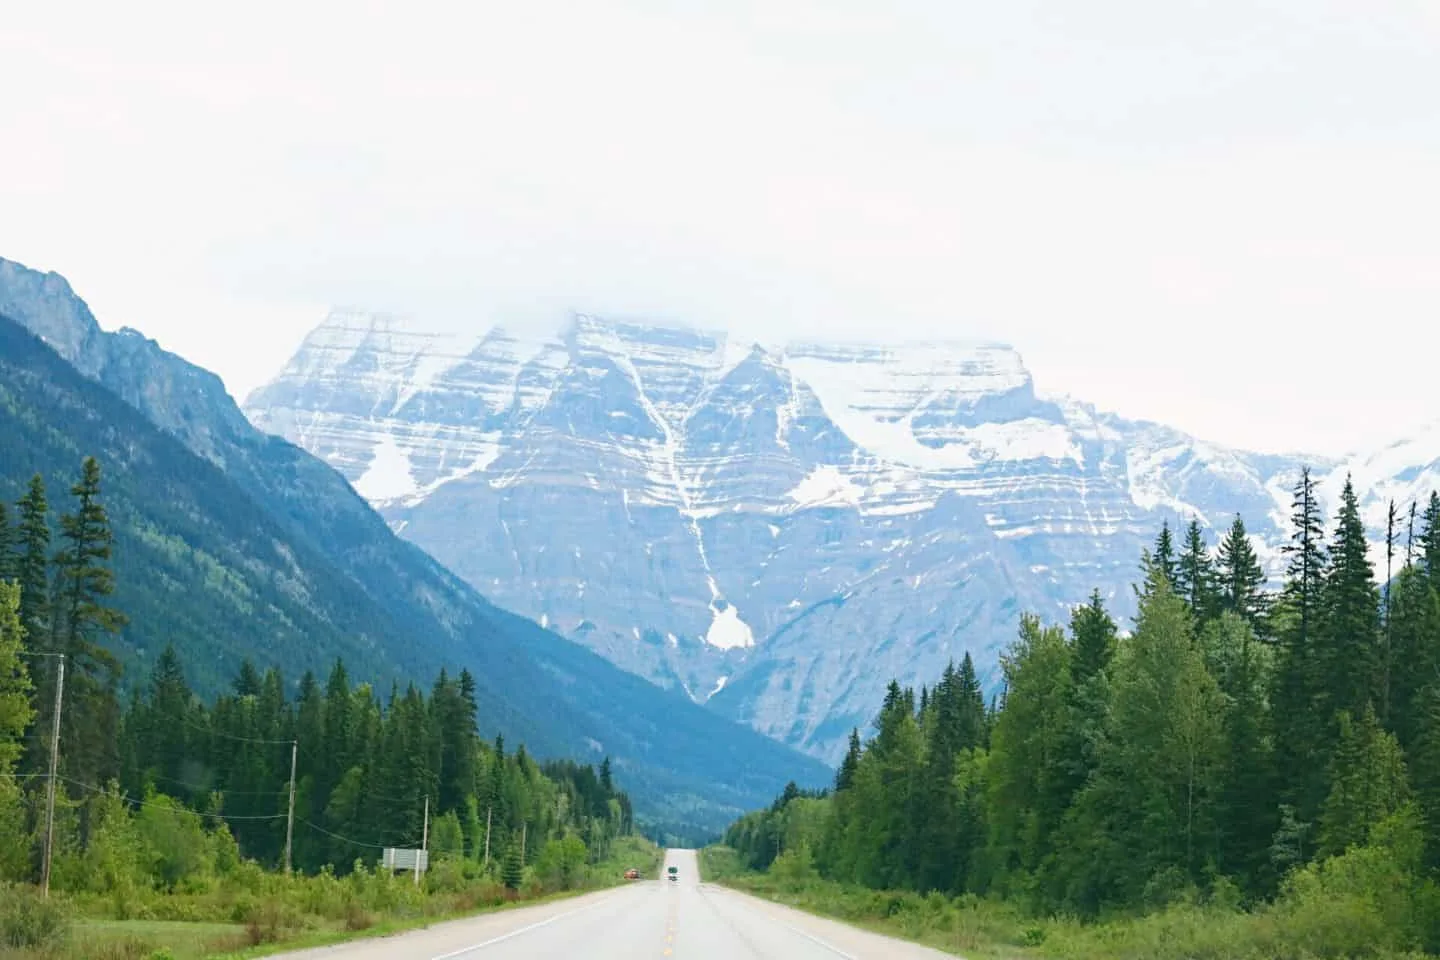 Driving along Icefields Parkway in Banff, Alberta